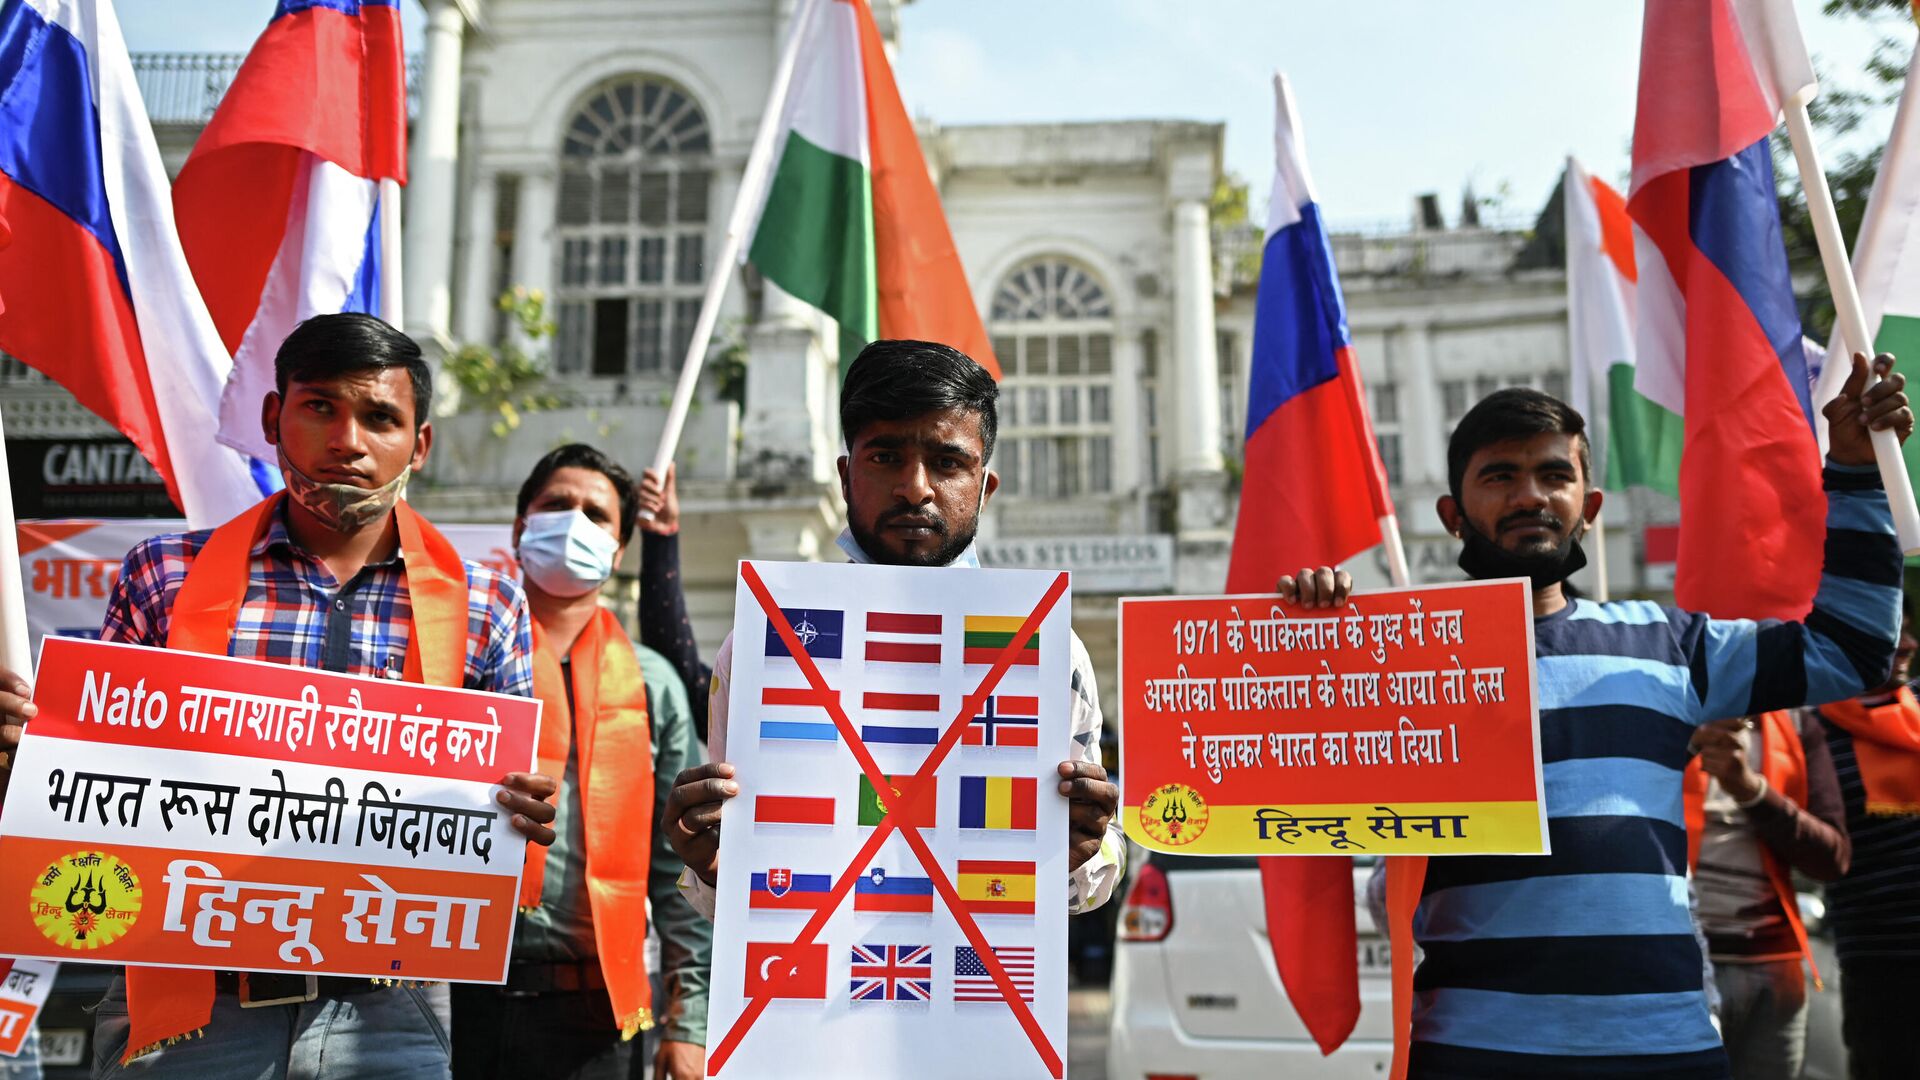 Supporters and activists of Hindu Sena, a right-wing Hindu group, take part in a march in support of Russia during the ongoing Russia-West tensions on Ukraine, in New Delhi on March 6, 2022. - Sputnik International, 1920, 07.03.2022